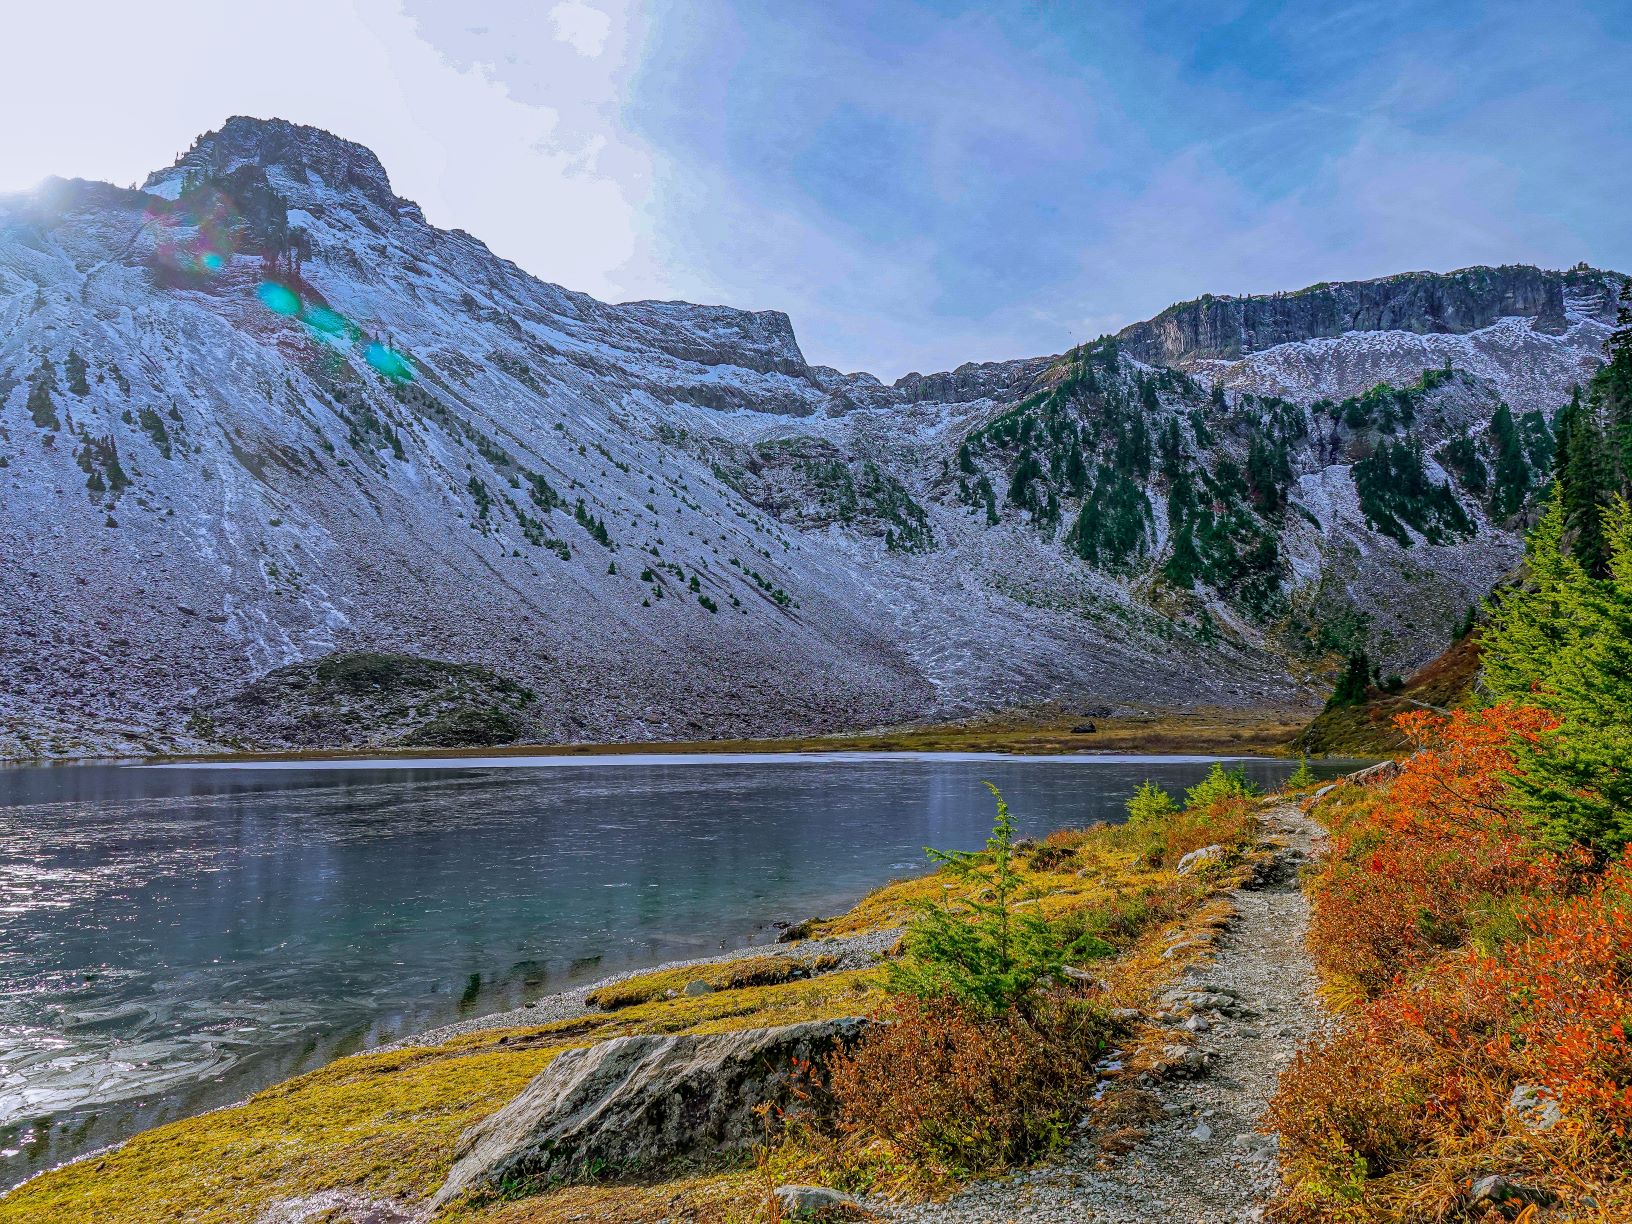 Mountain in background with dusting of snow. Water through the middle of the image. A small dirt pathway and colorful plants in the foreground.